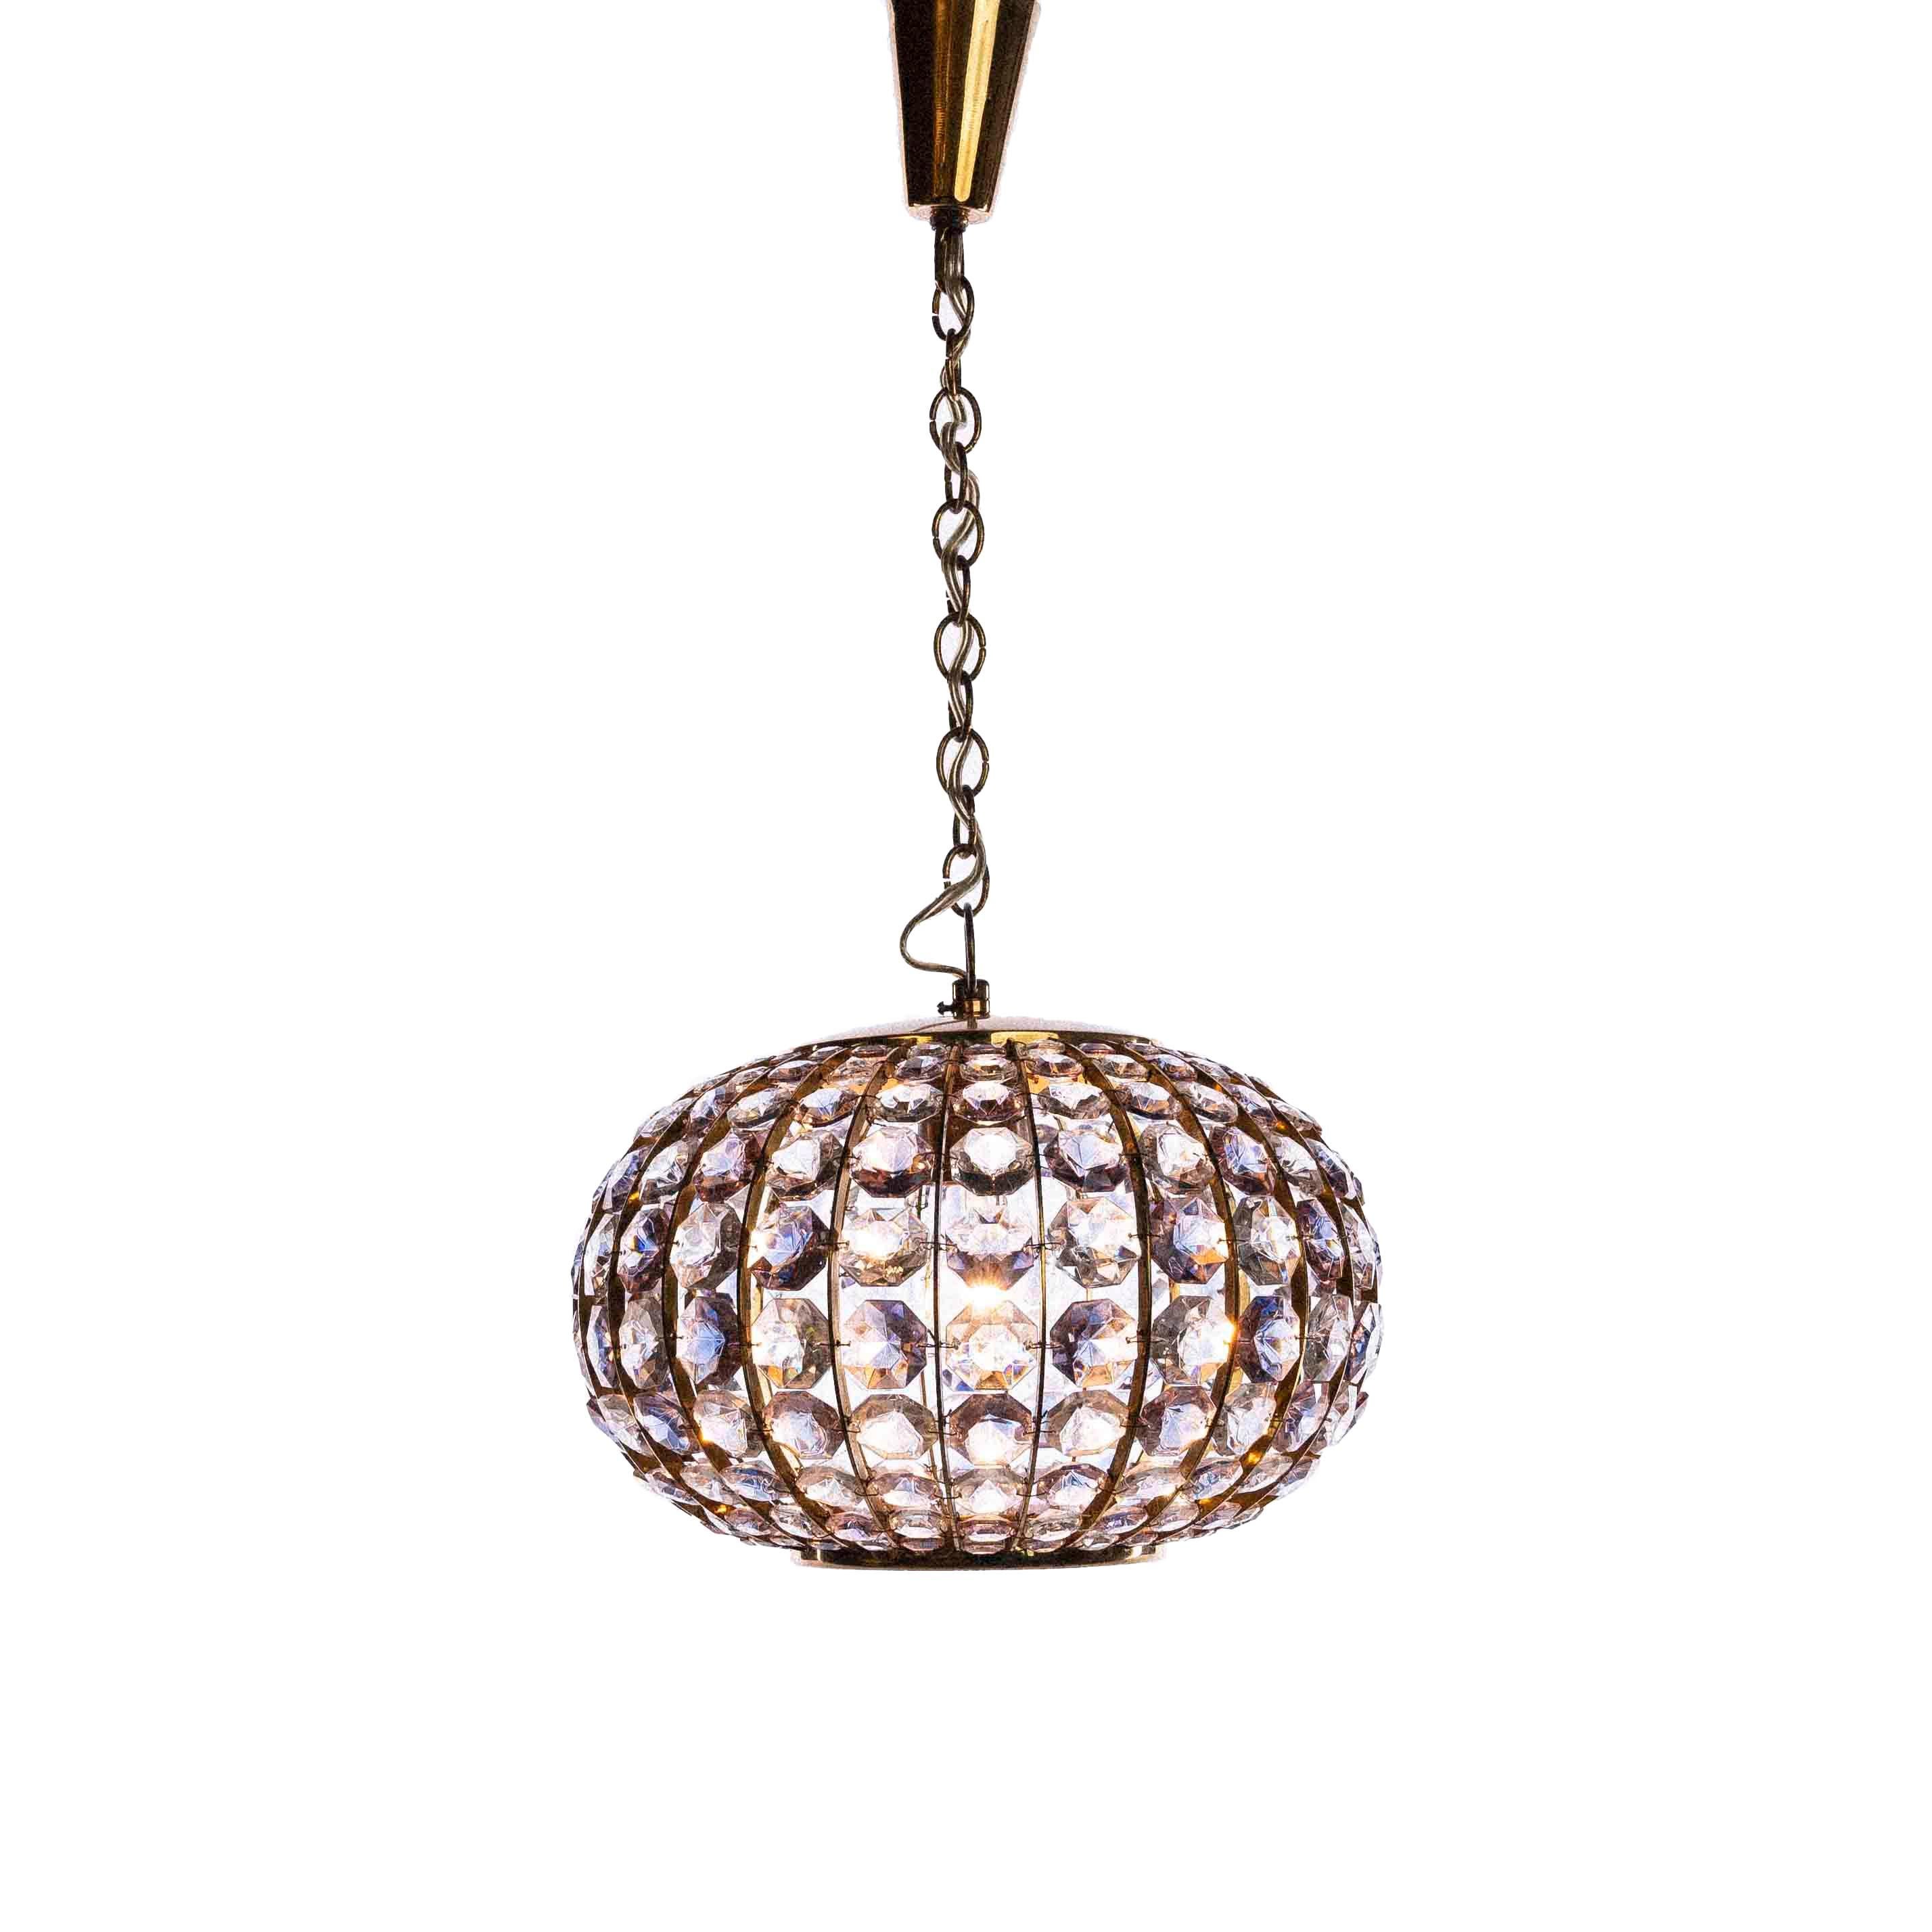 Beautiful petite brass and glass pendant fixture by Bakalowits & Sohne, 
Ten horizontal rows of pink and clear crystal diamond cut crystals in different sizes and color – Small fixture but gives a luxurious look to the room.
Measures: Height with